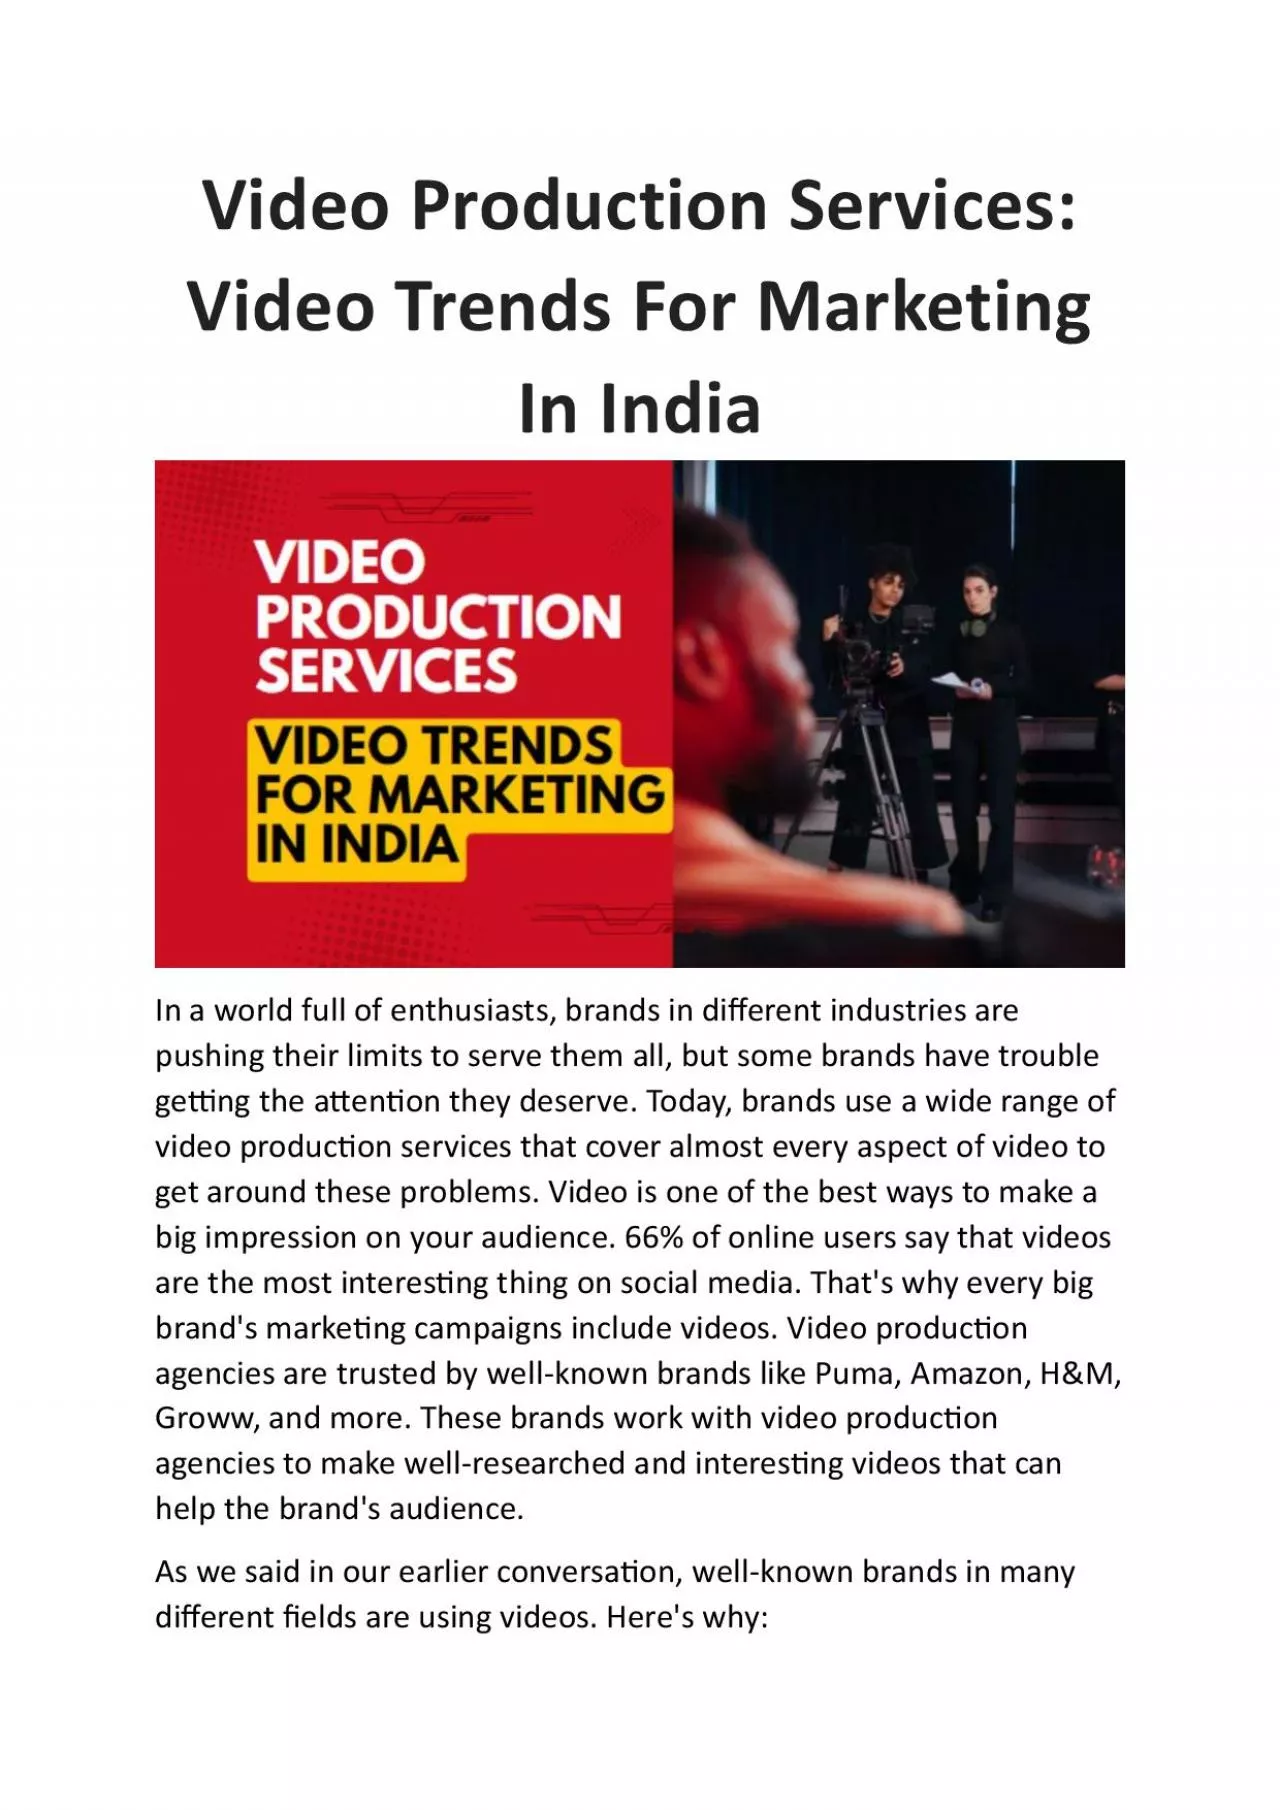 Video Production Services: Video Trends For Marketing In India